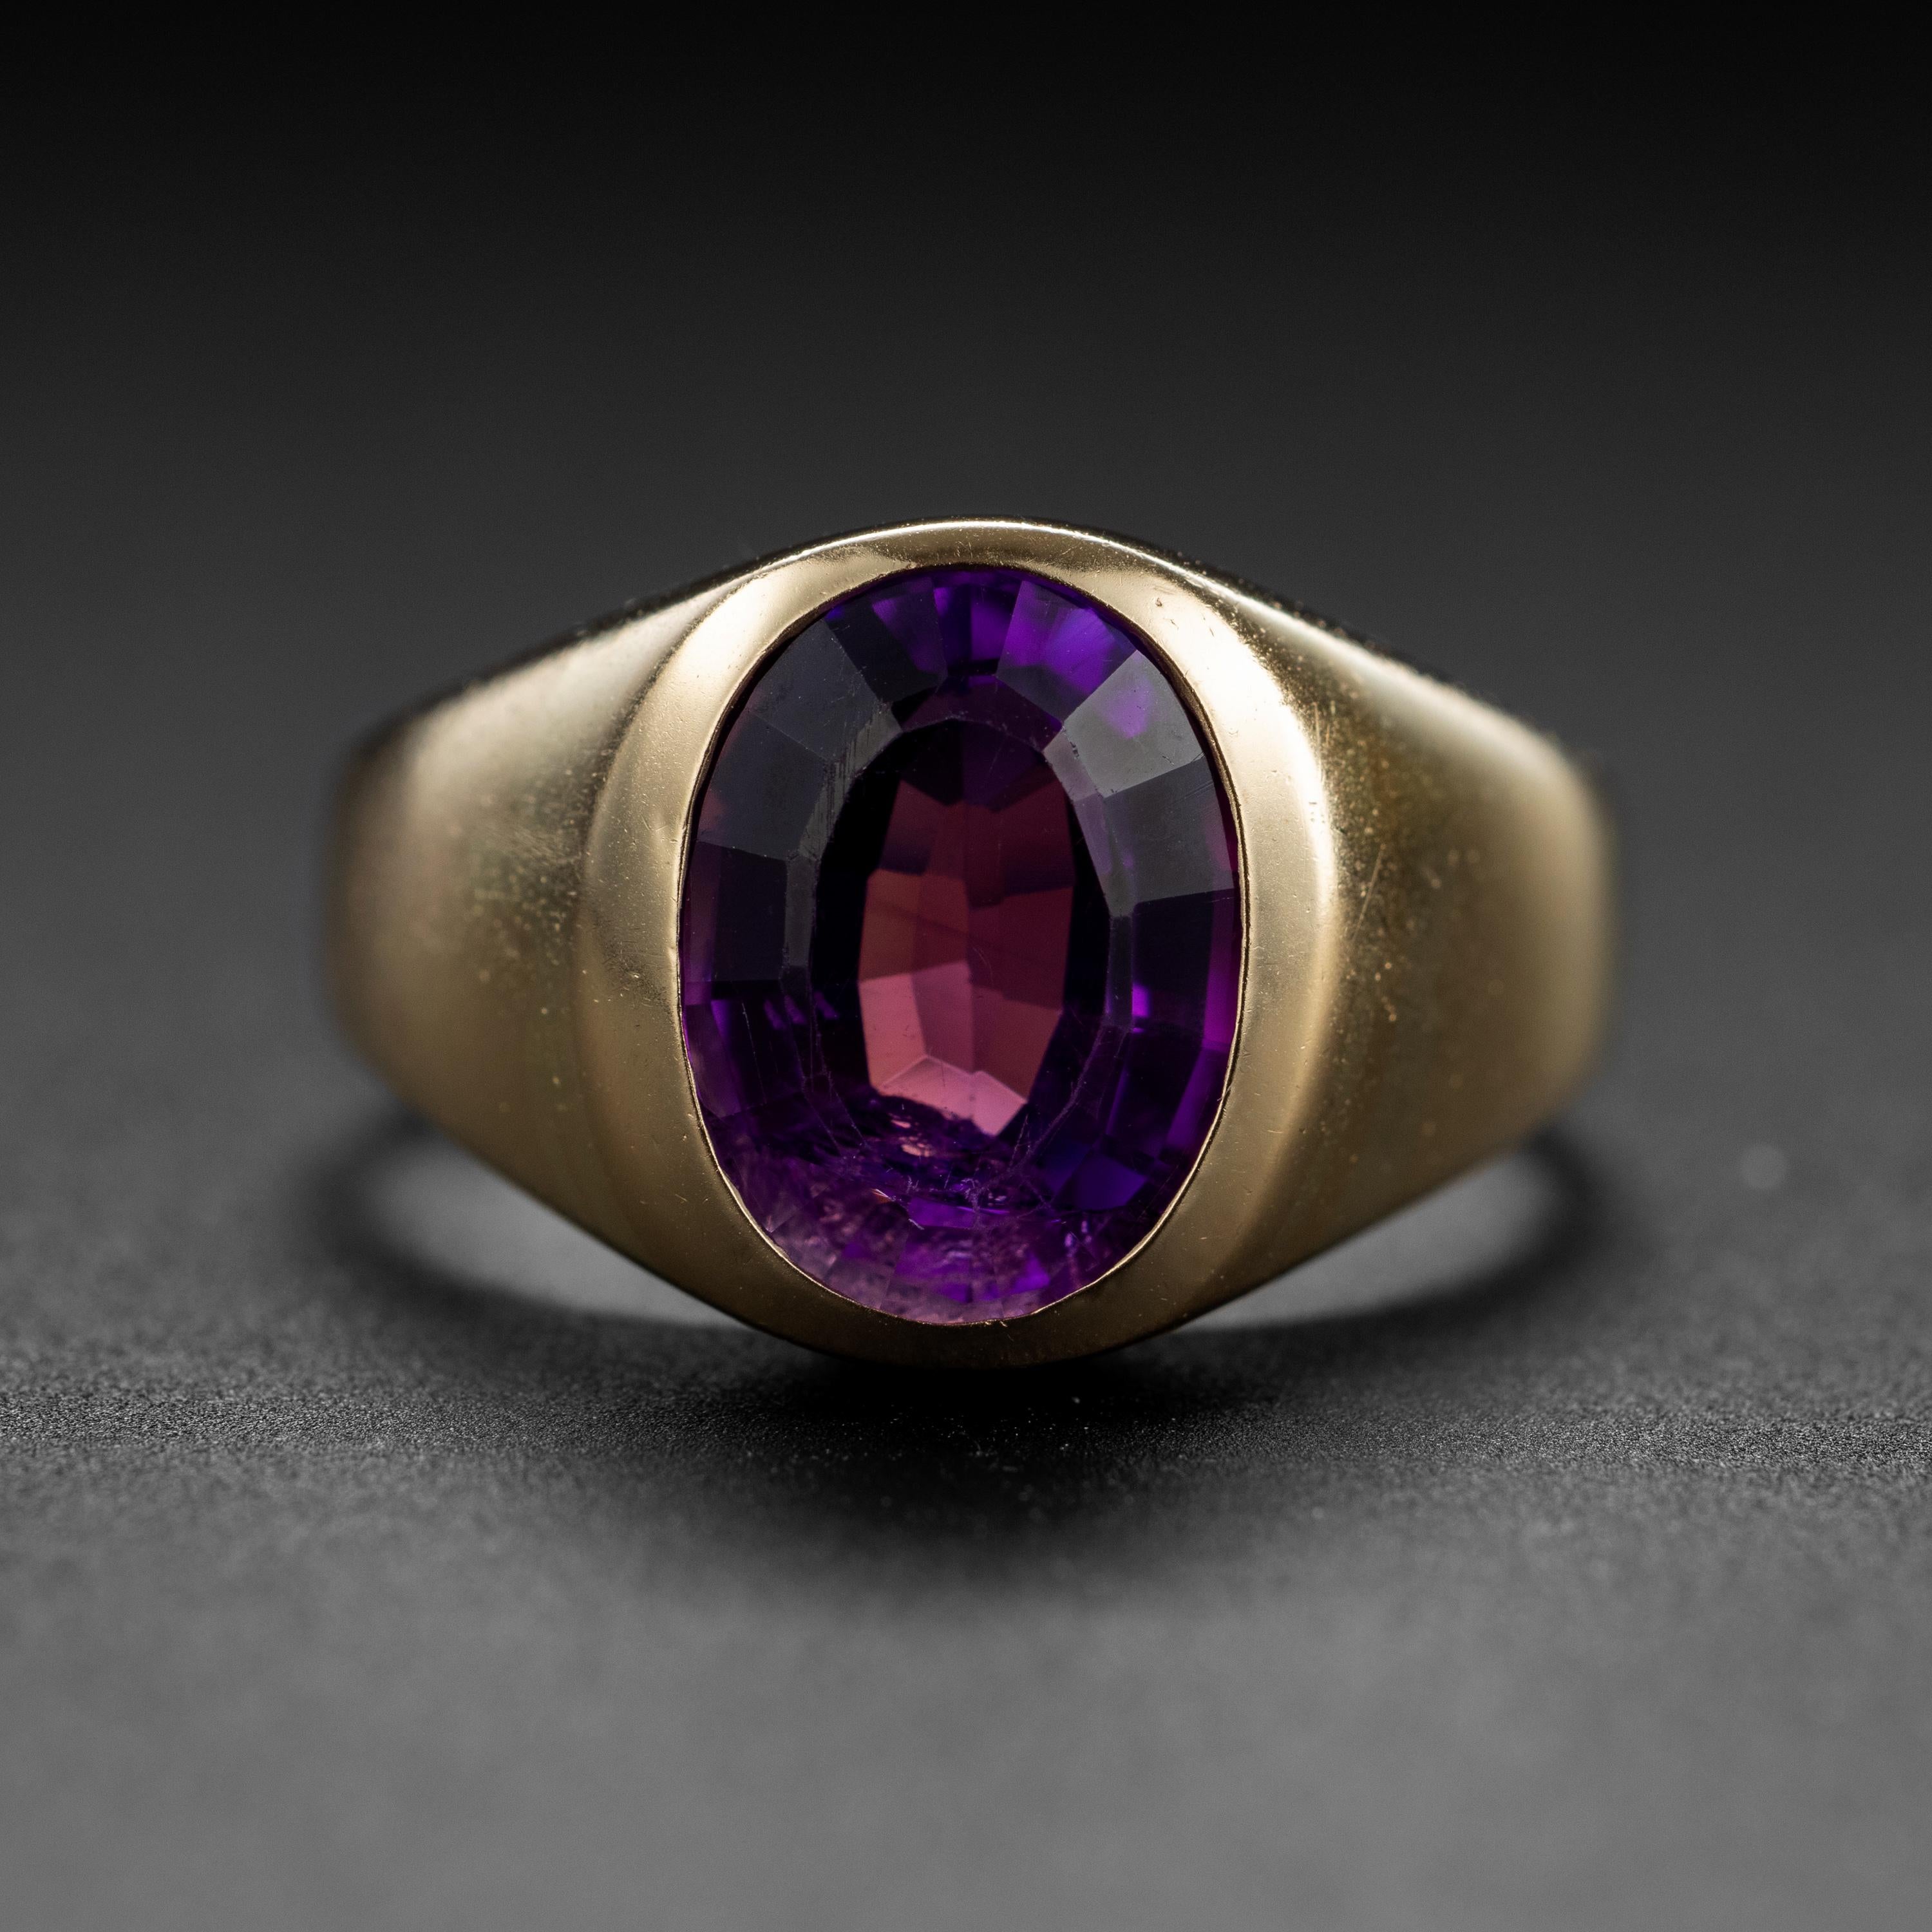 This is a perfectly proportioned, satisfyingly dense, and exceedingly well-made yellow gold and amethyst ring dating from the middle of the last century -circa 1960s. The sleek, aerodynamic lines are complimented perfectly by the soft satin-finish